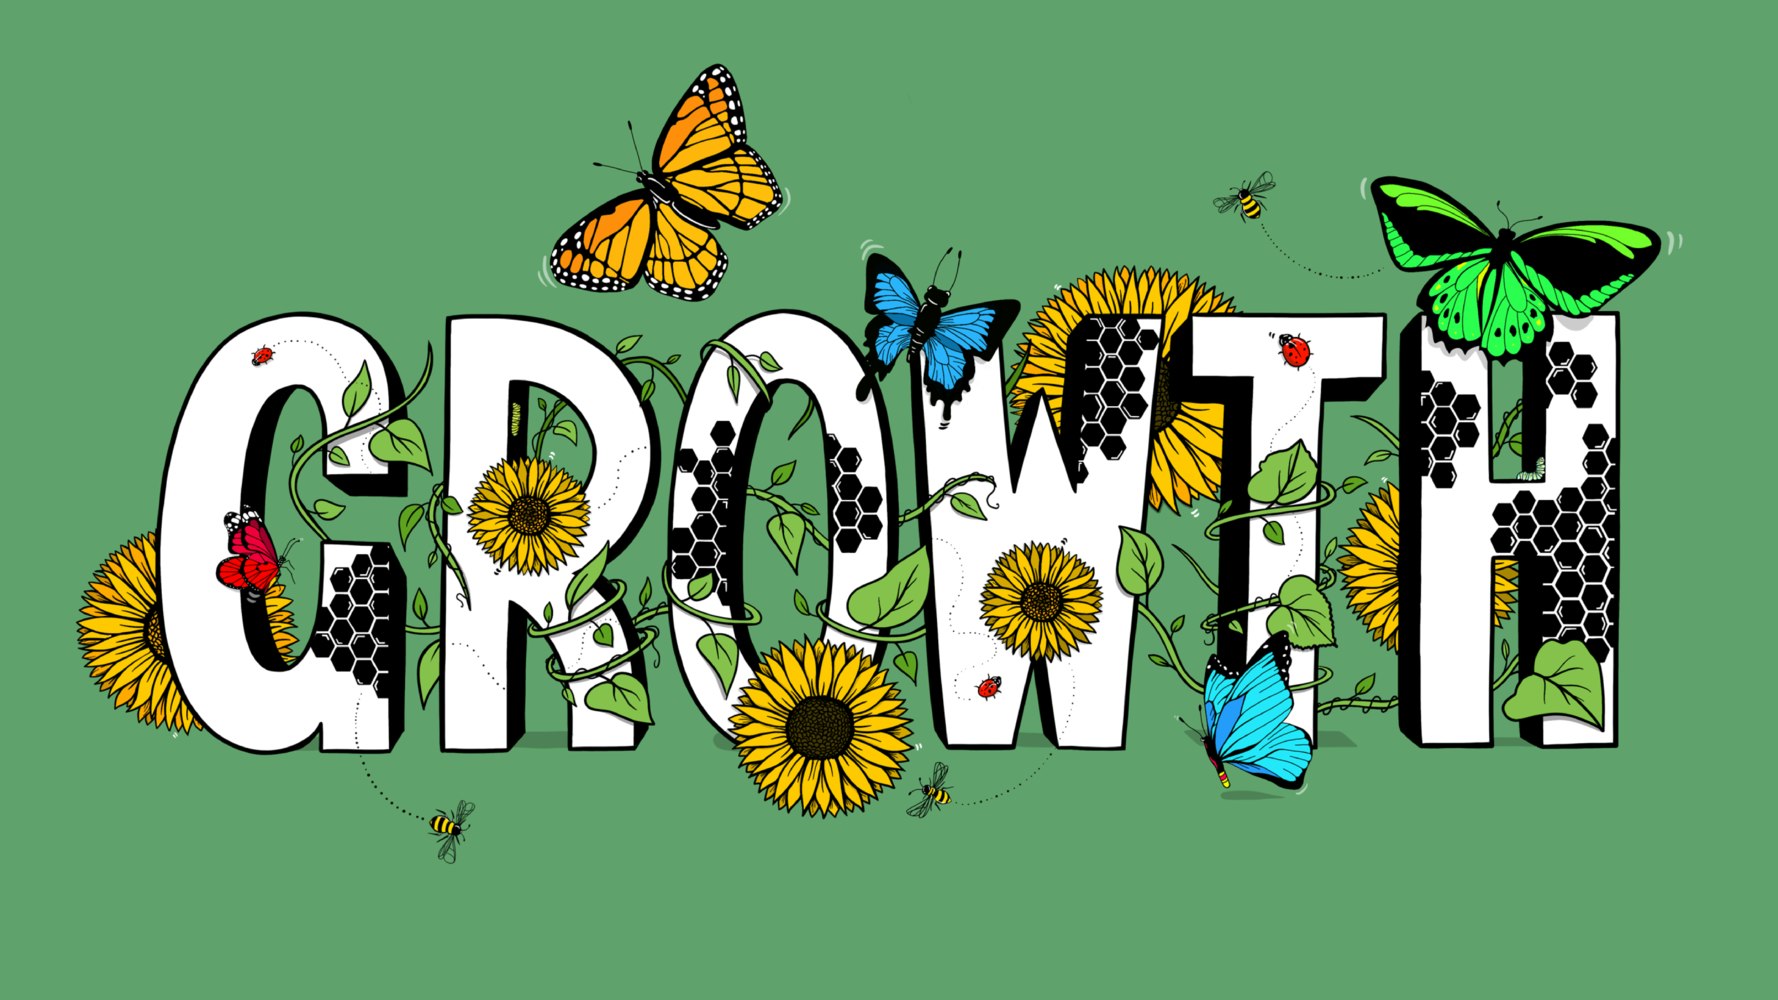 The word Growth covered in butterflies, sunflowers and vines